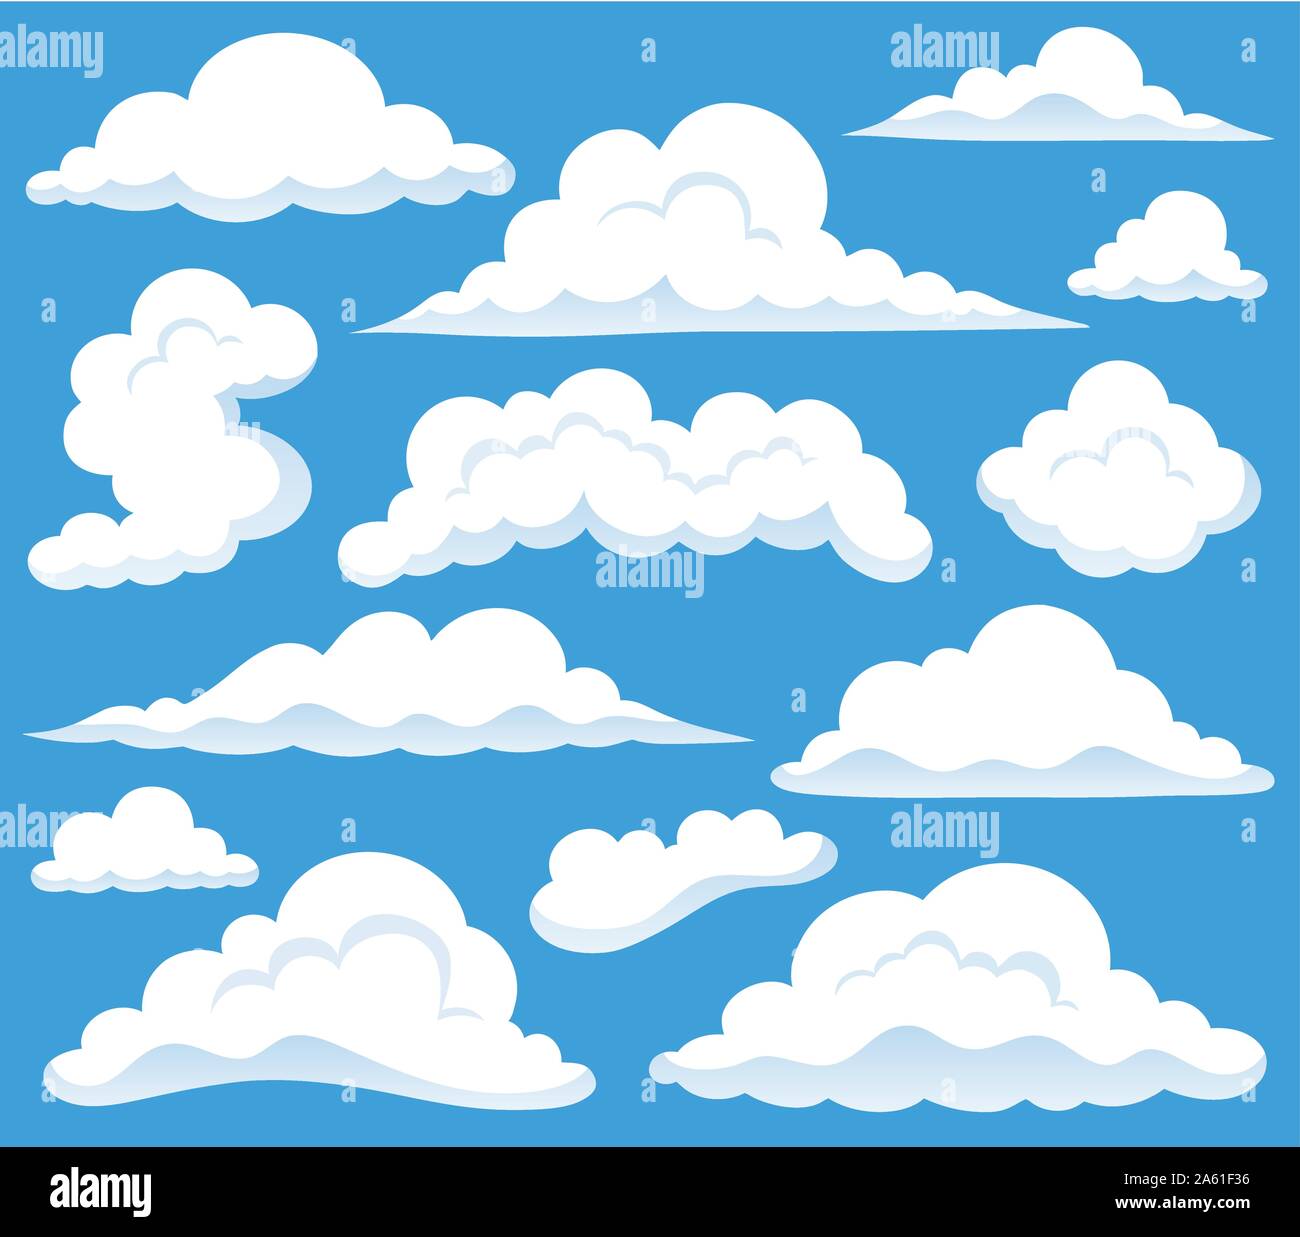 Clouds topic image 1 - eps10 vector illustration. Stock Vector